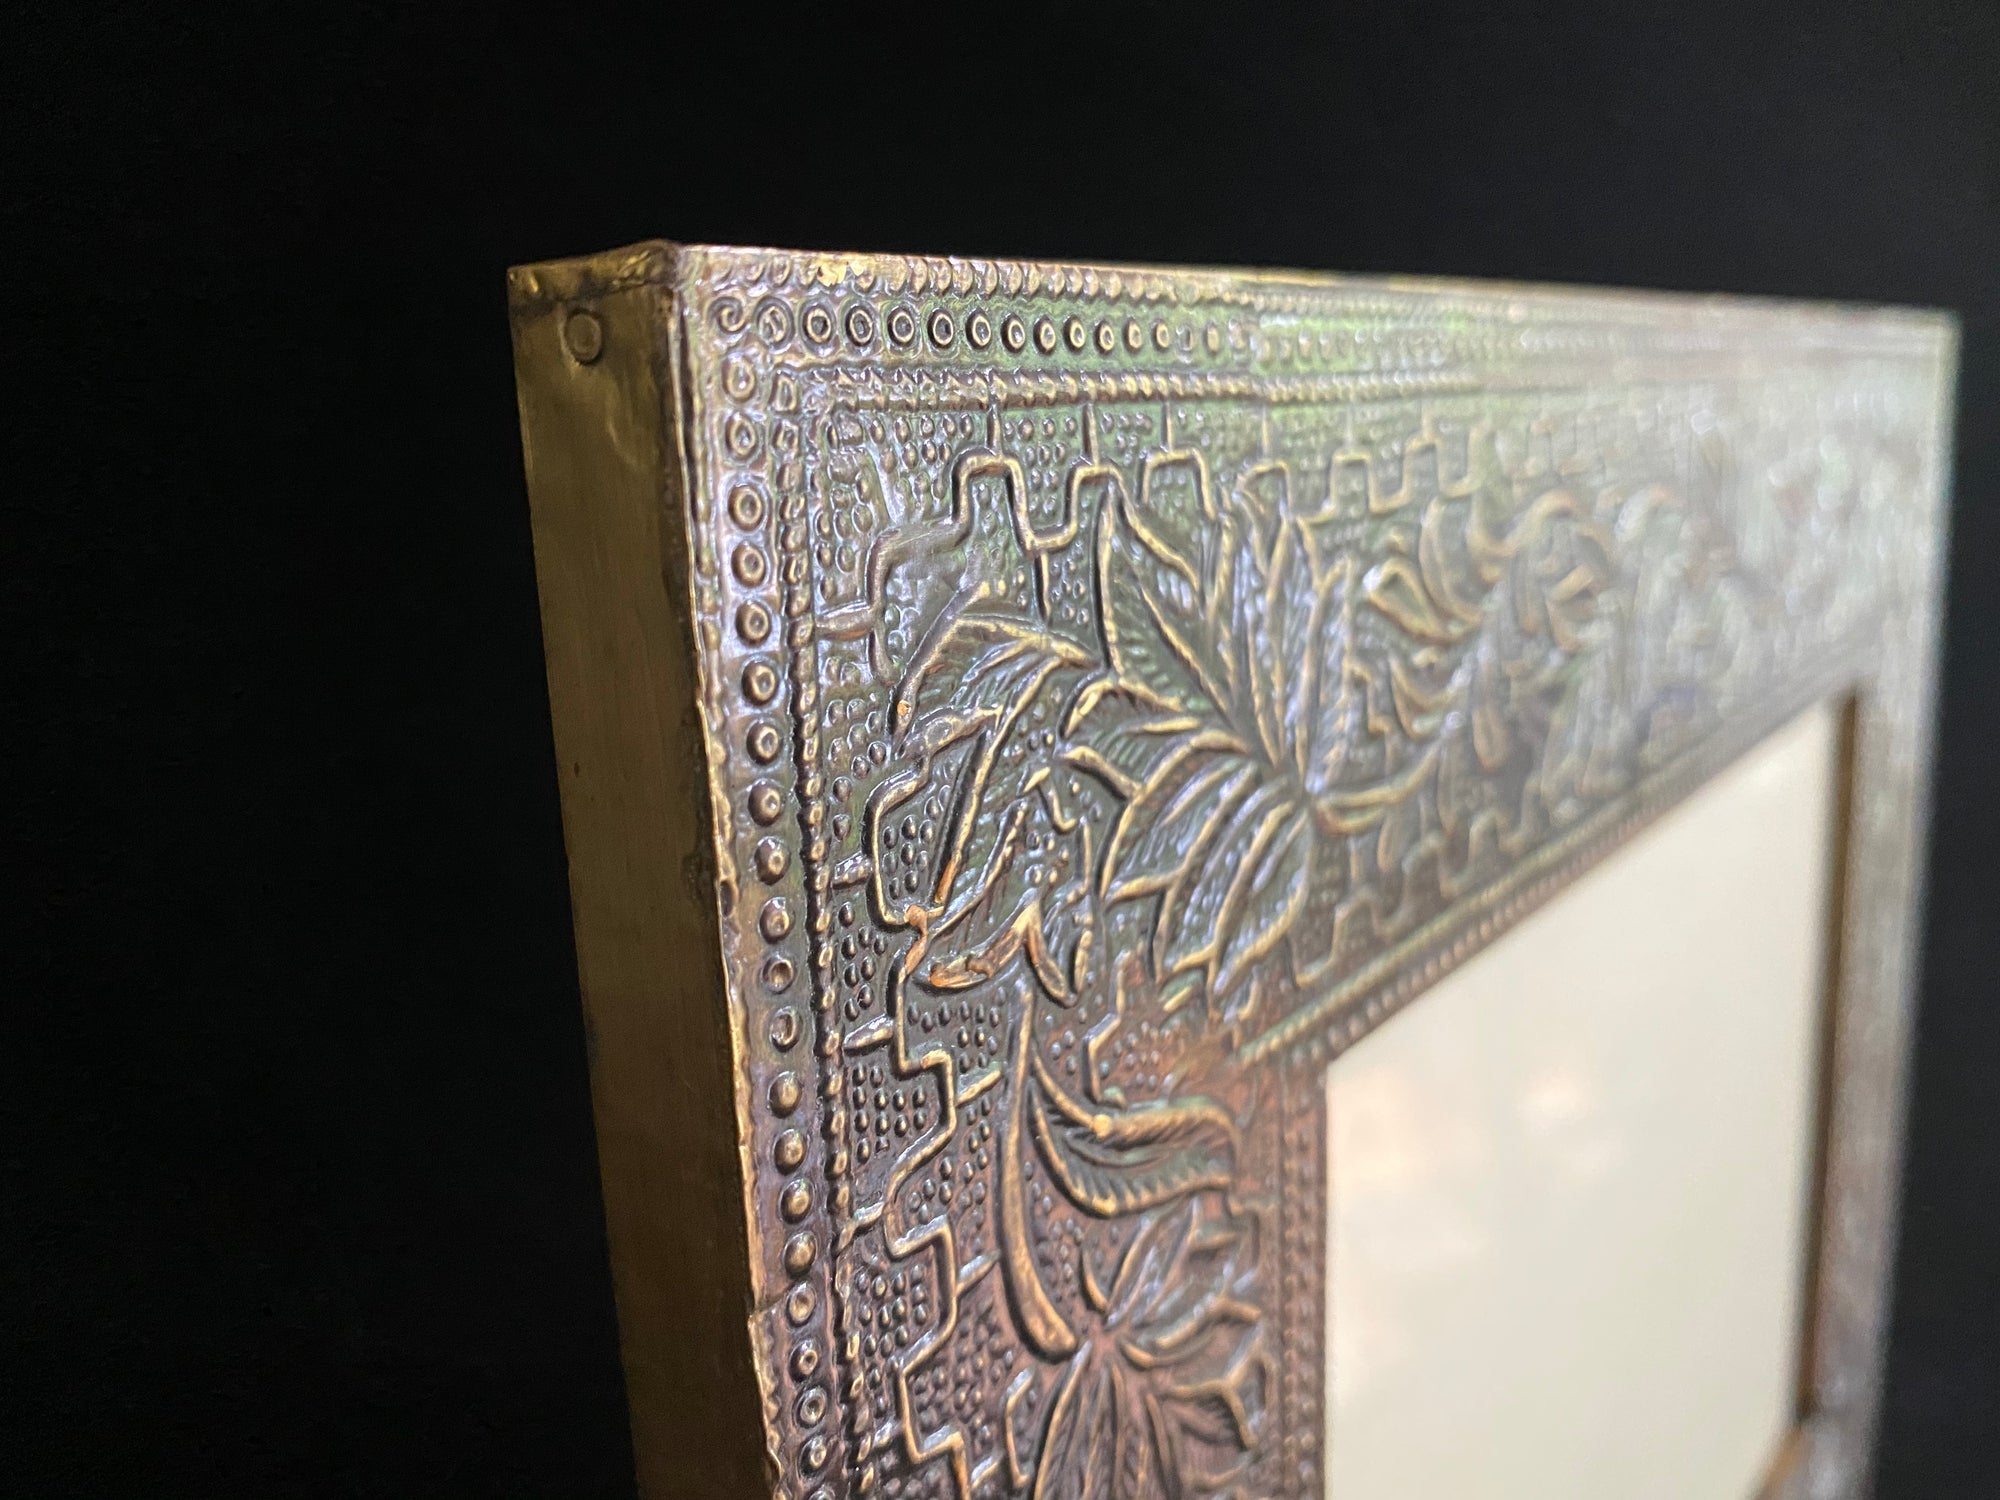 Photo frame features patterned brass over a hardwood frame